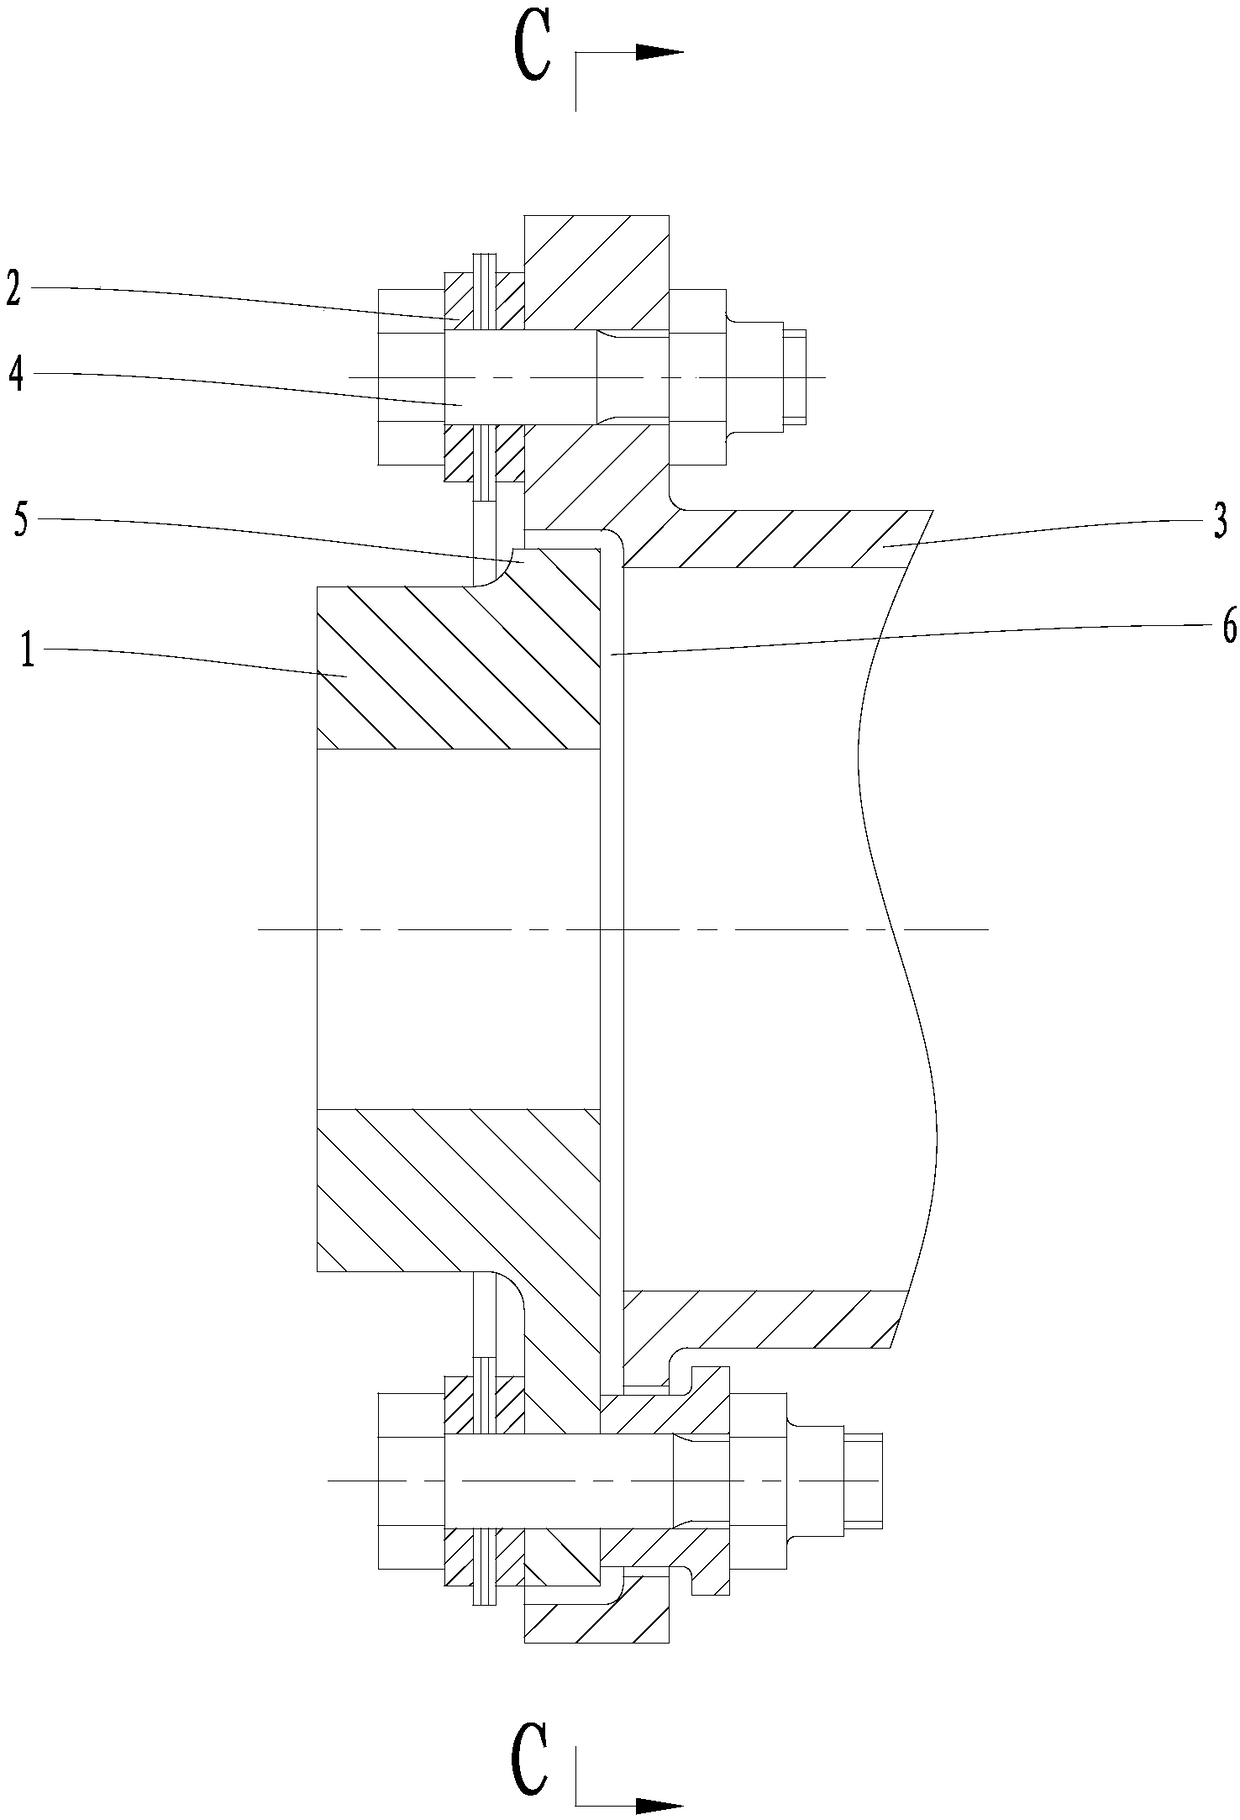 Overload protection structure for coupler